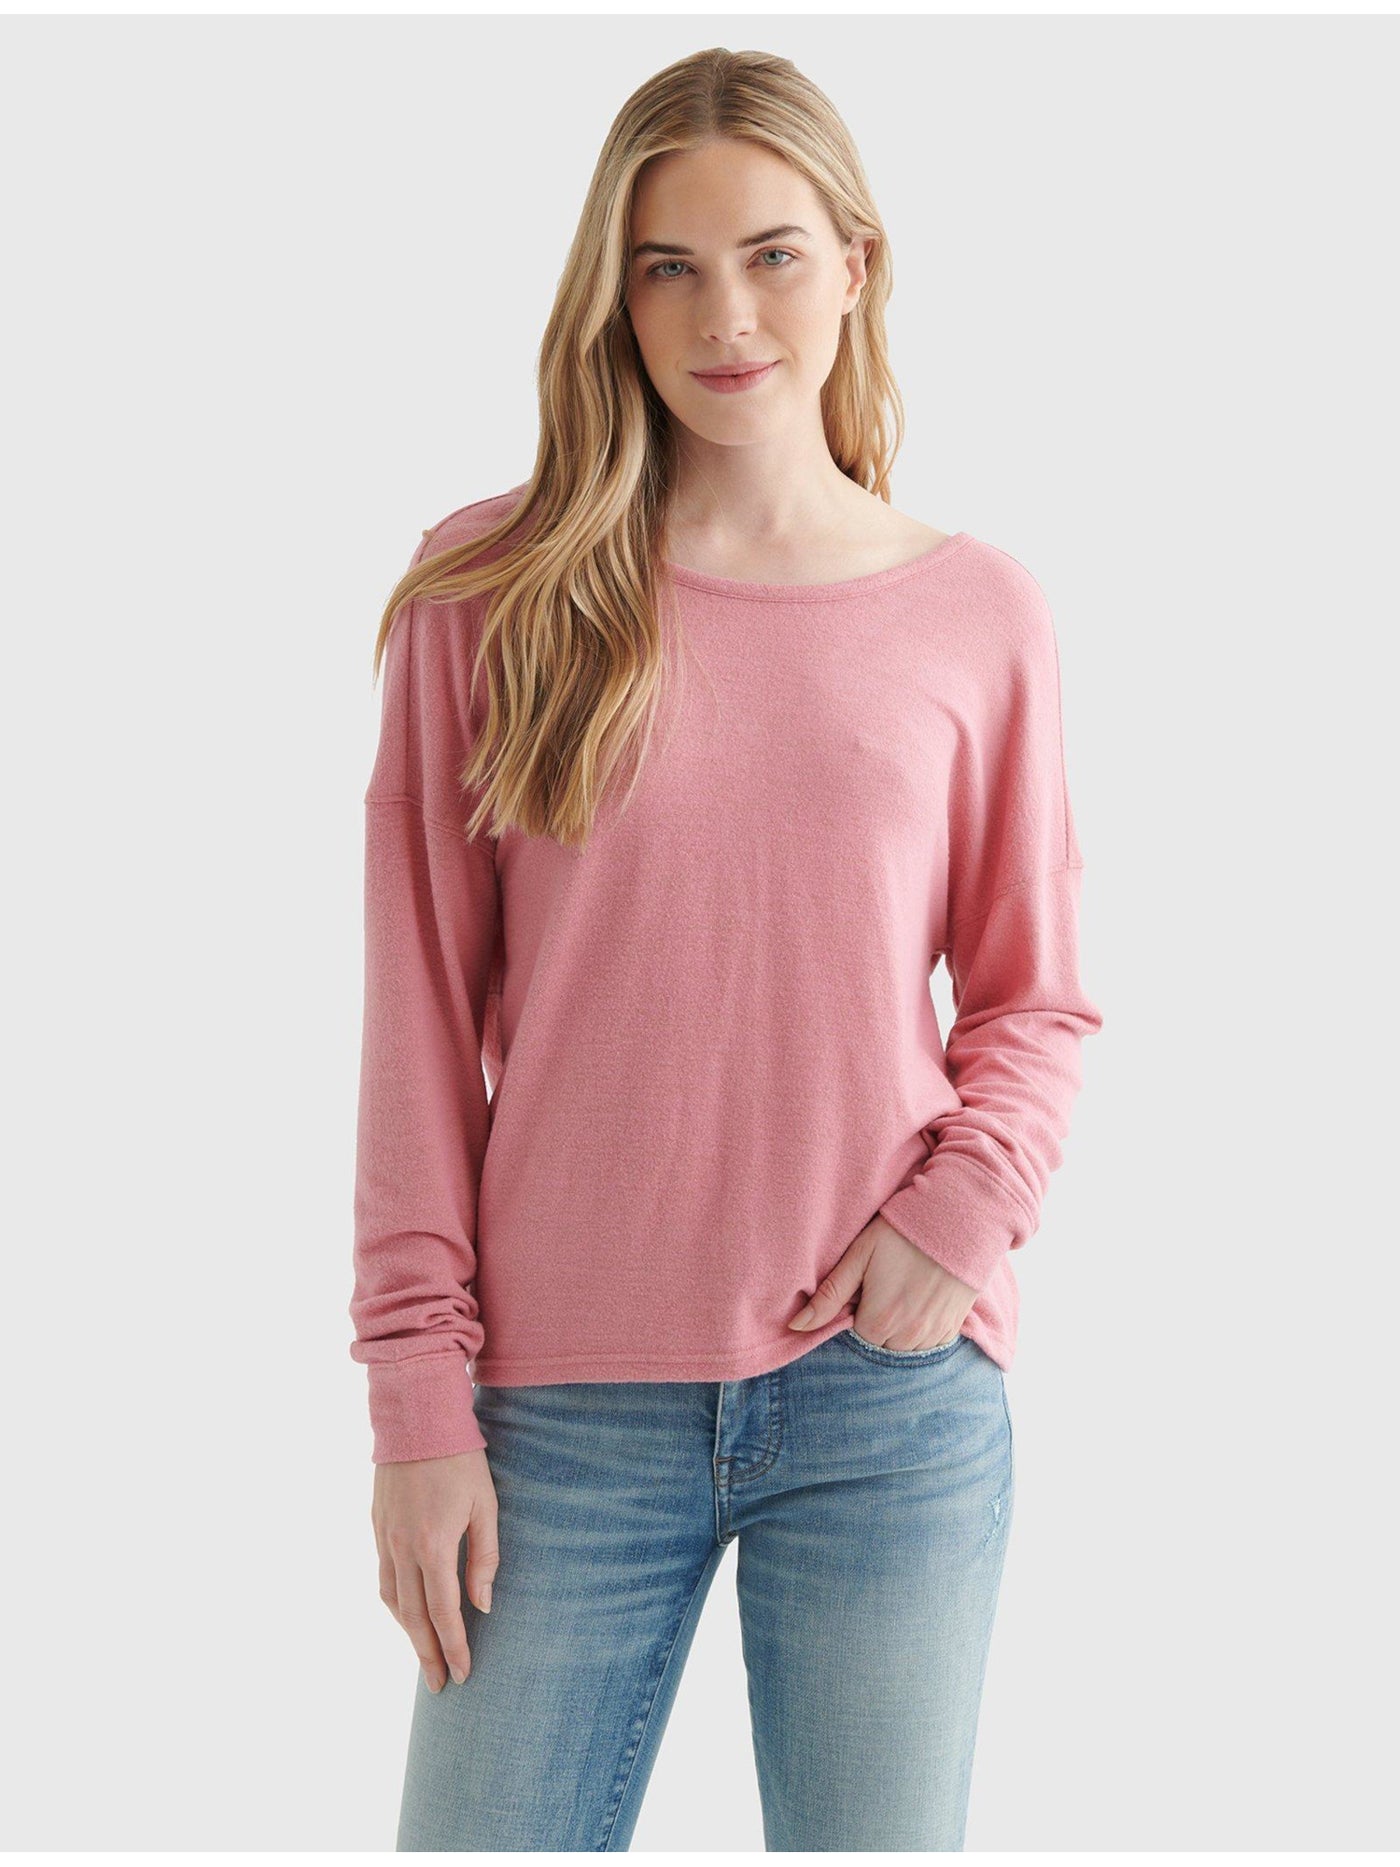 LUCKY BRAND Womens Pink Jersey Textured Twist Back Long Sleeve Boat Neck Top XL